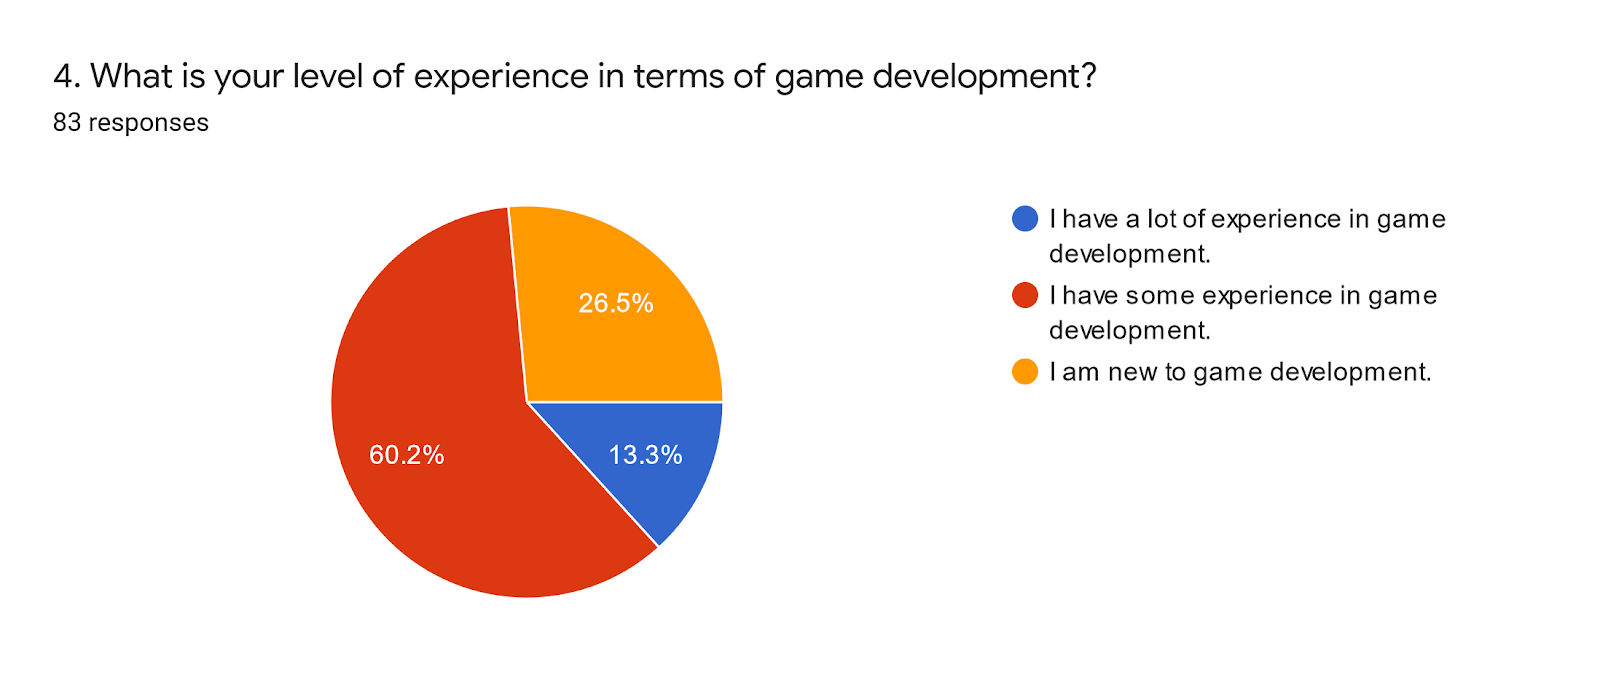 Forms response chart. Question title: 4. What is your level of experience in terms of game development?. Number of responses: 83 responses.